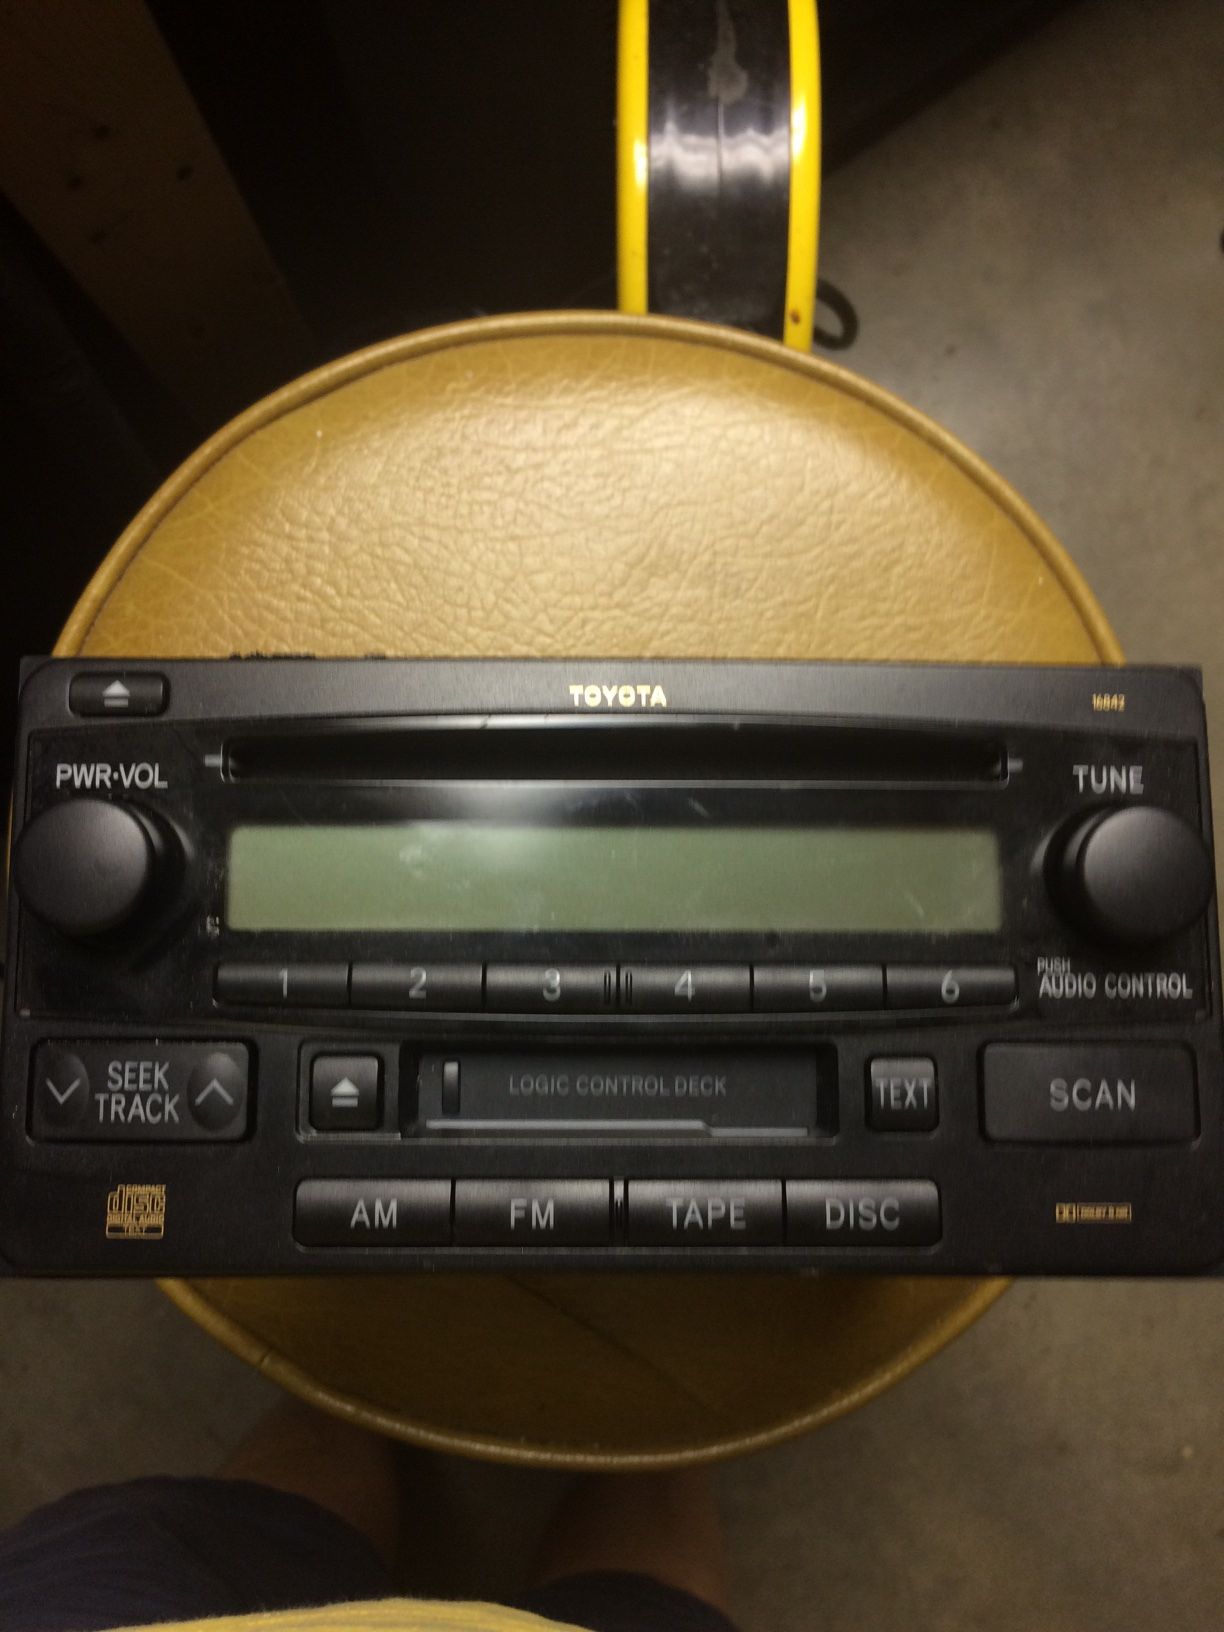 2007 Toyota Highlander Tape Deck/CD Player with 6 Programmable Radio Stations